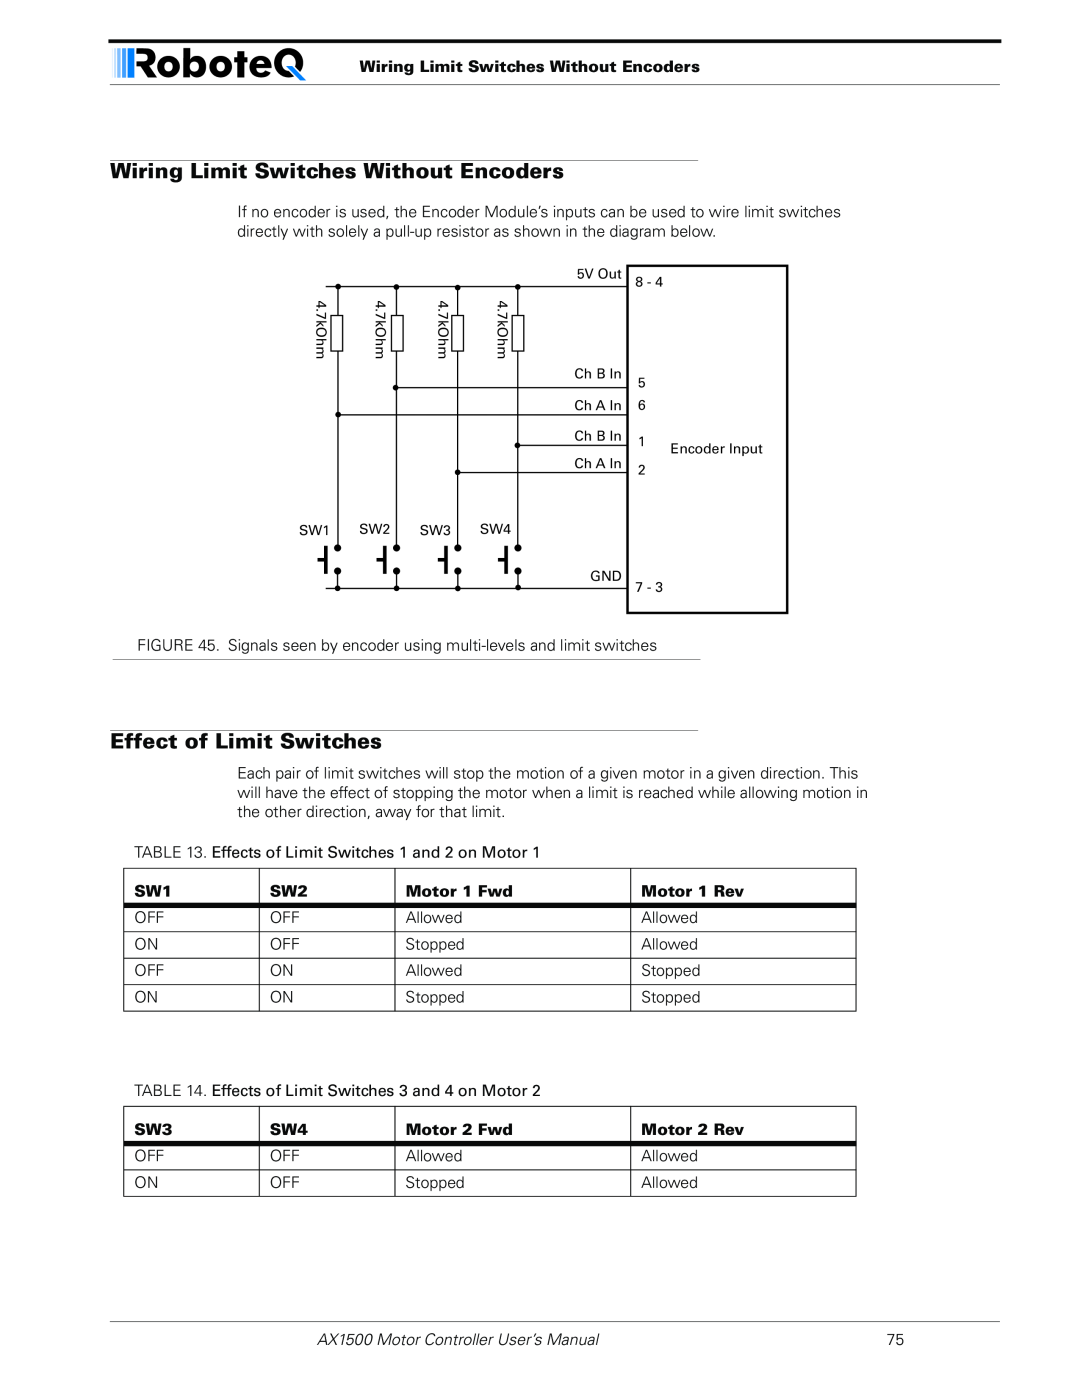 RoboteQ AX1500 Wiring Limit Switches Without Encoders, Effect of Limit Switches, Motor 1 Fwd, Motor 1 Rev, Motor 2 Fwd 